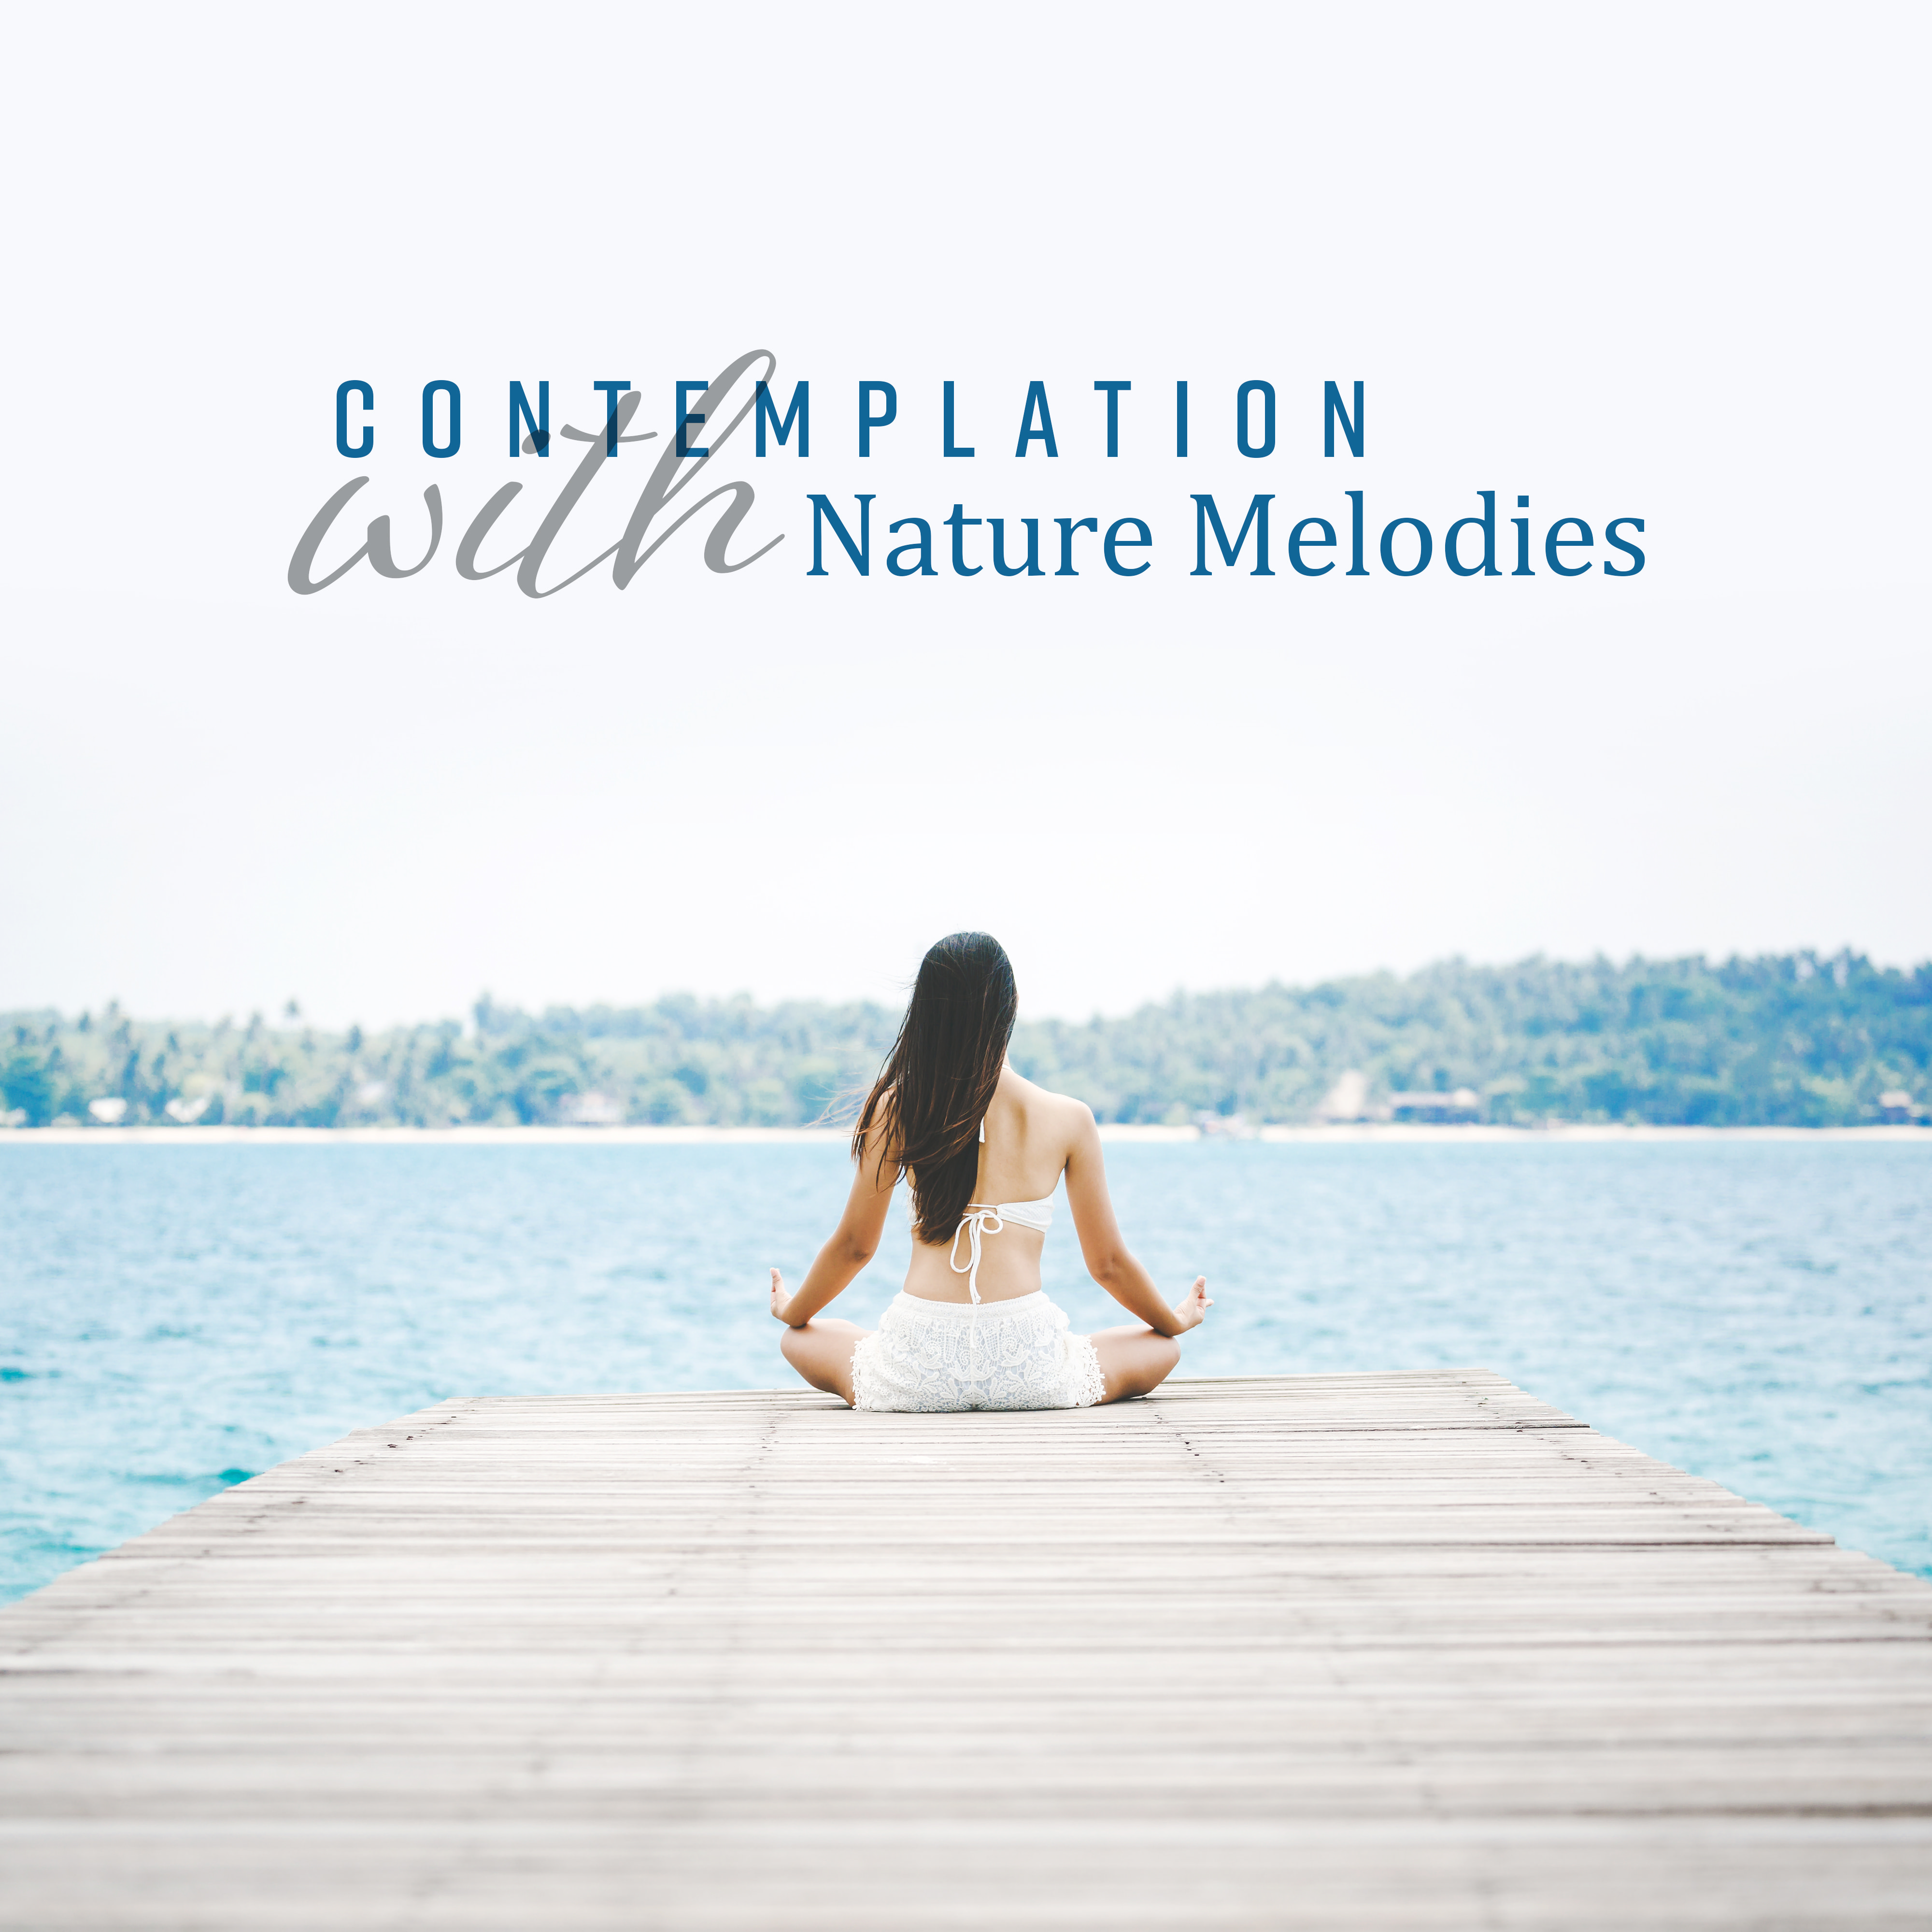 Contemplation with Nature Melodies